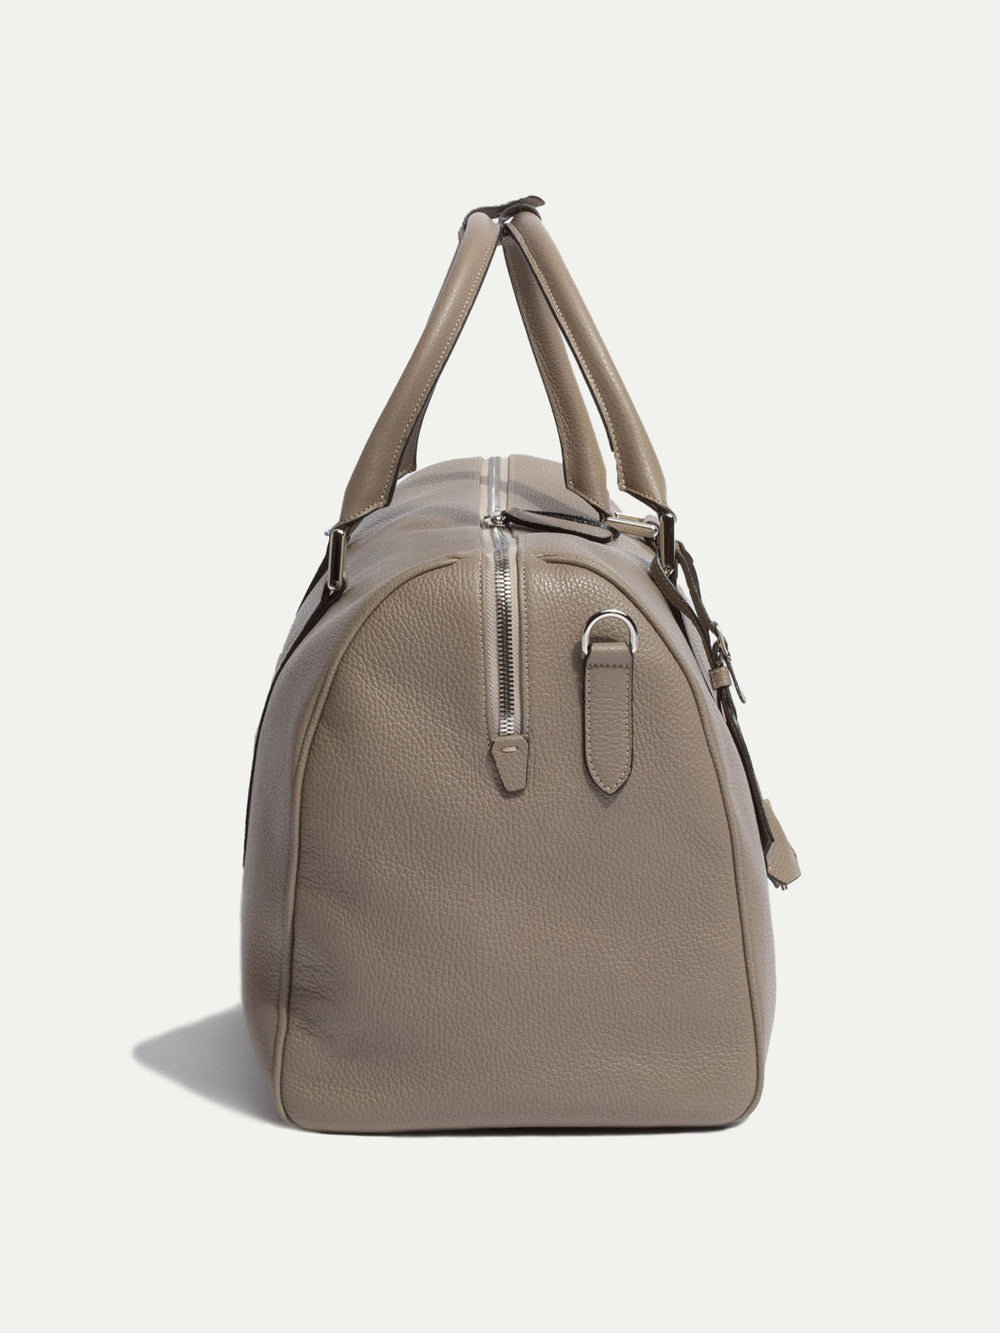 Taupe leather weekender bag - Made in Italy